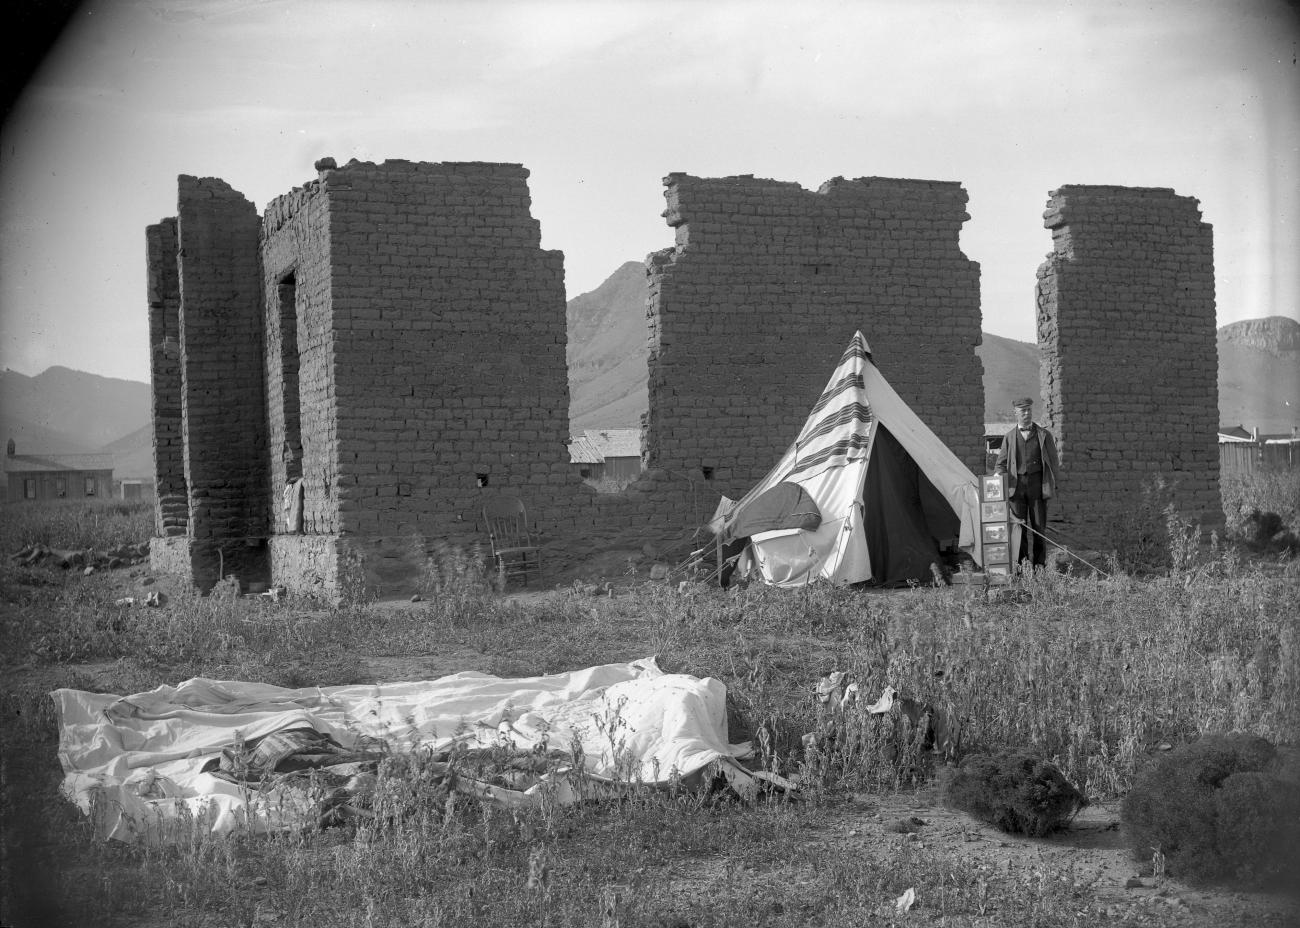 Walter Johnson stands next to ruins of the Grand Hotel in Magdalena, New Mexico. A rack of photographs is visible beside him. September, 1898.